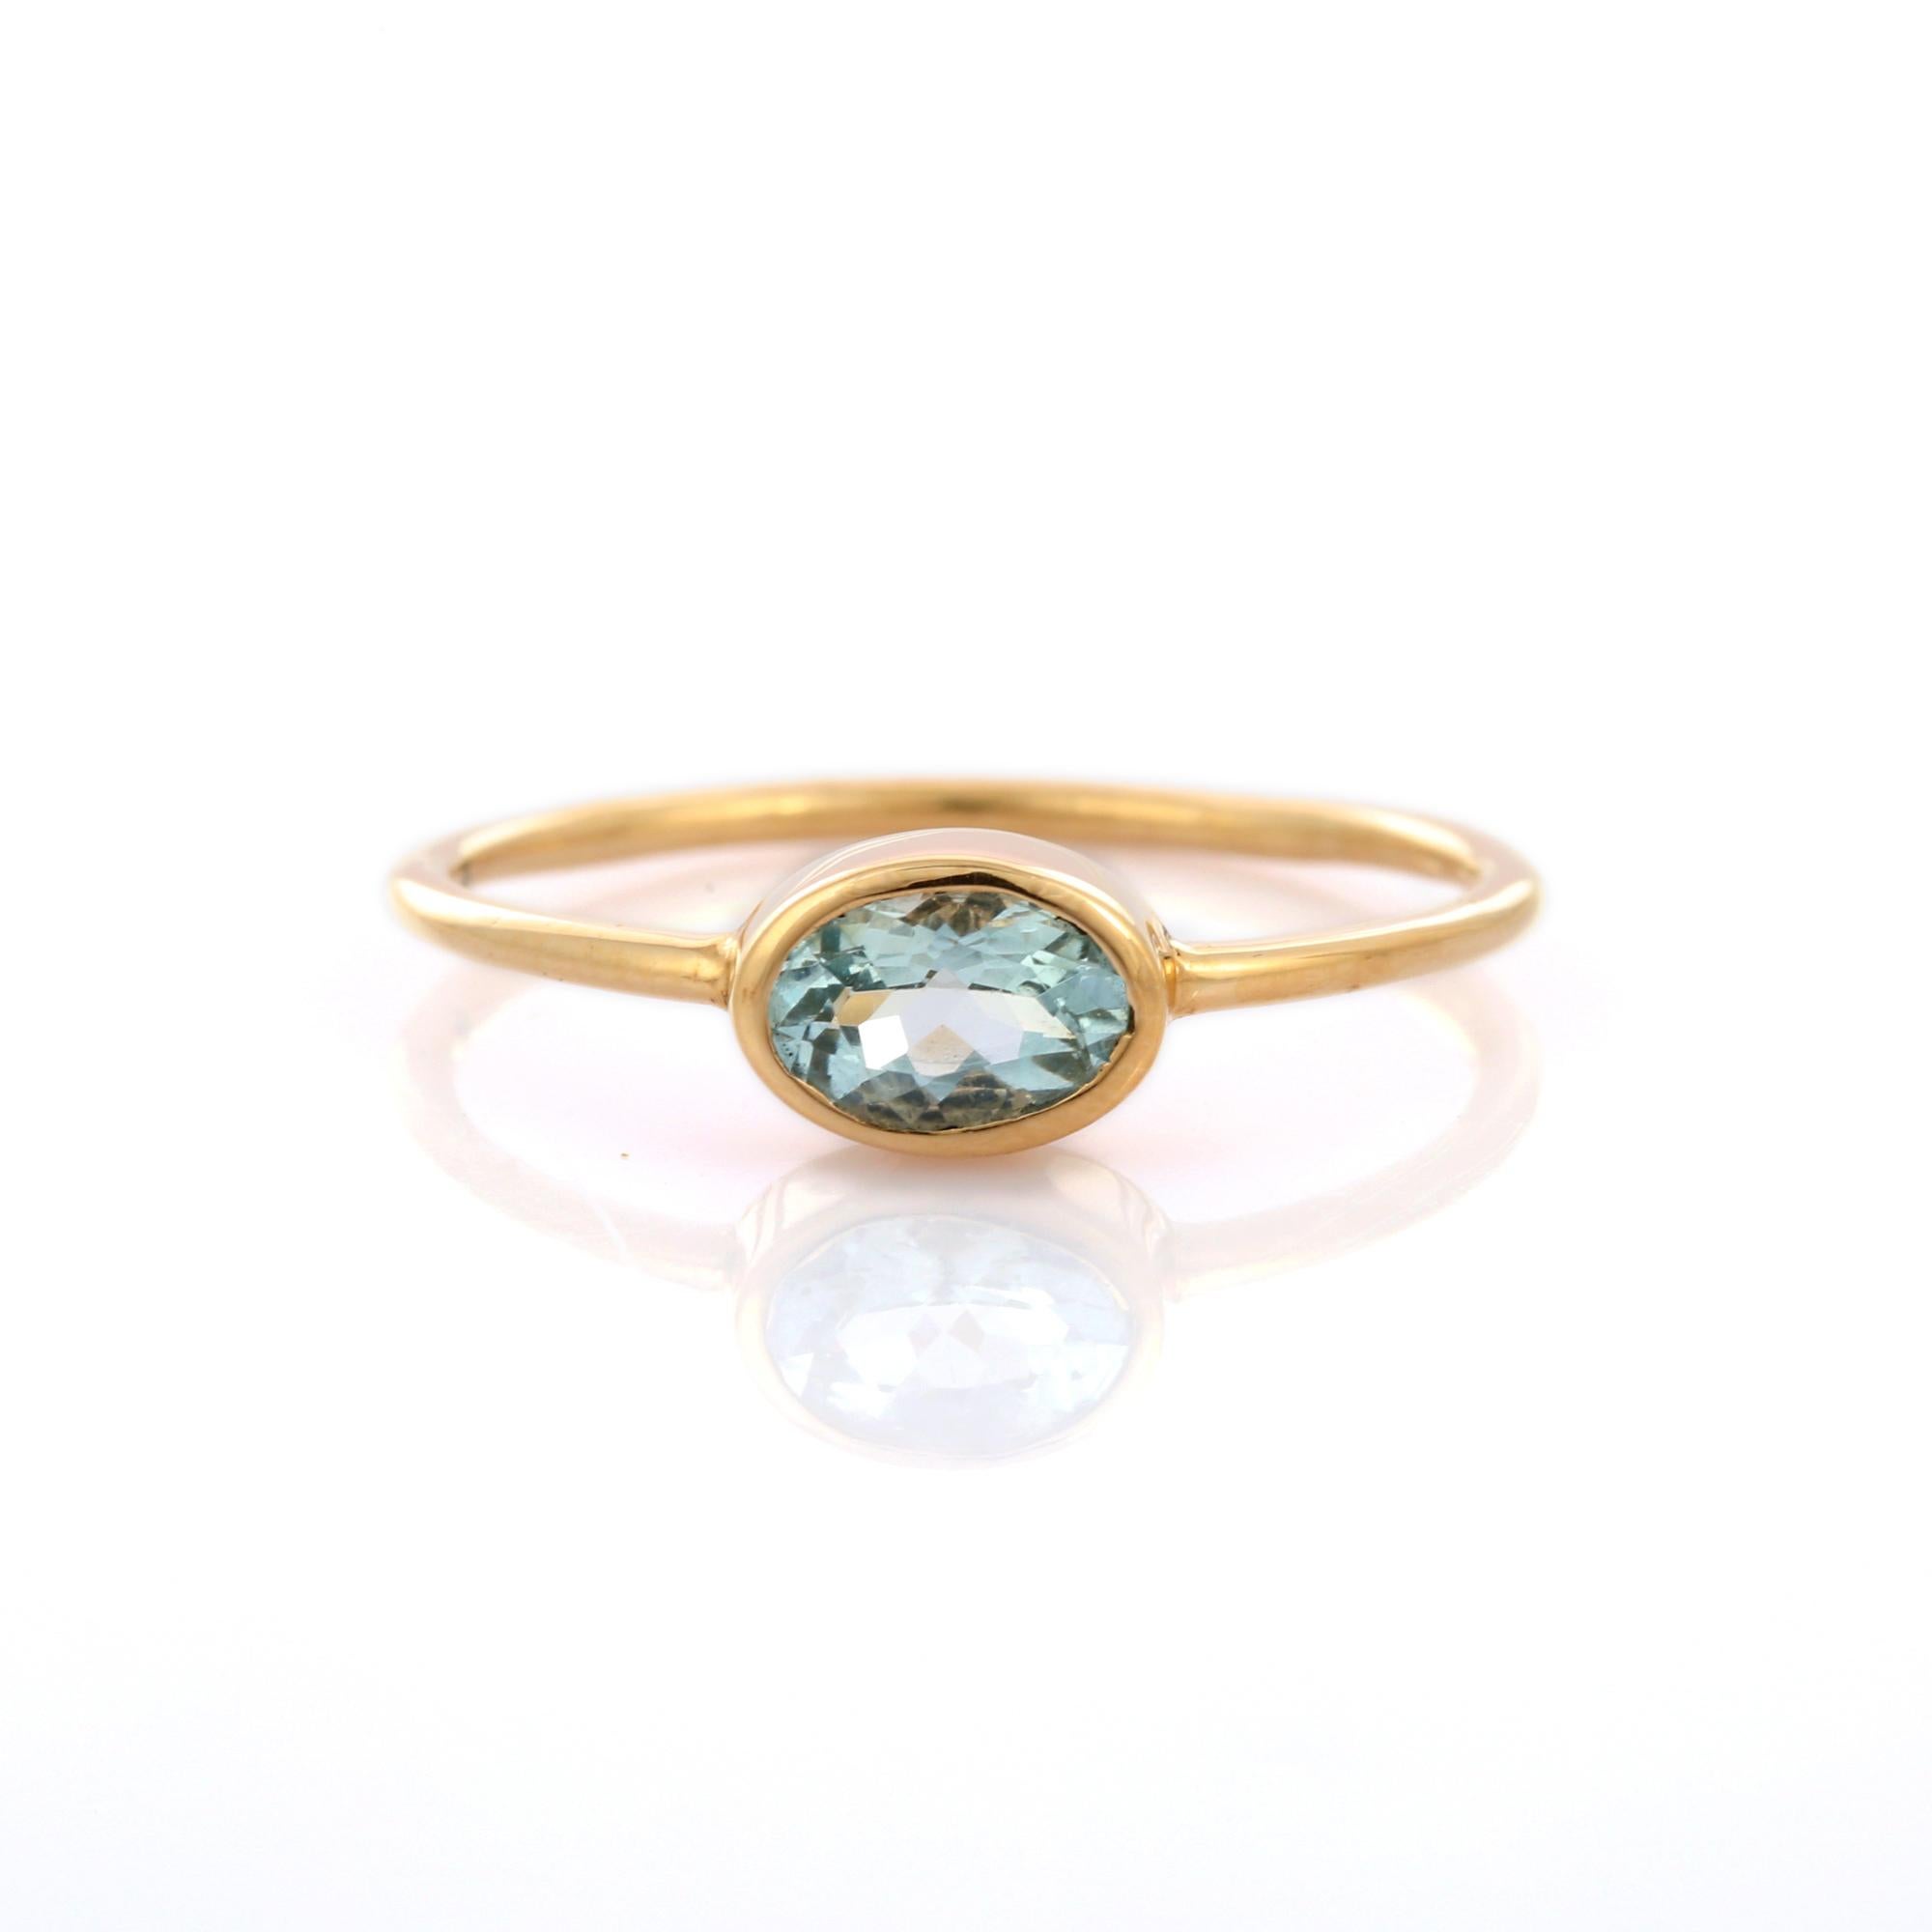 For Sale:  Oval Cut Natural Aquamarine Solitaire Ring in 14K Yellow Gold 7